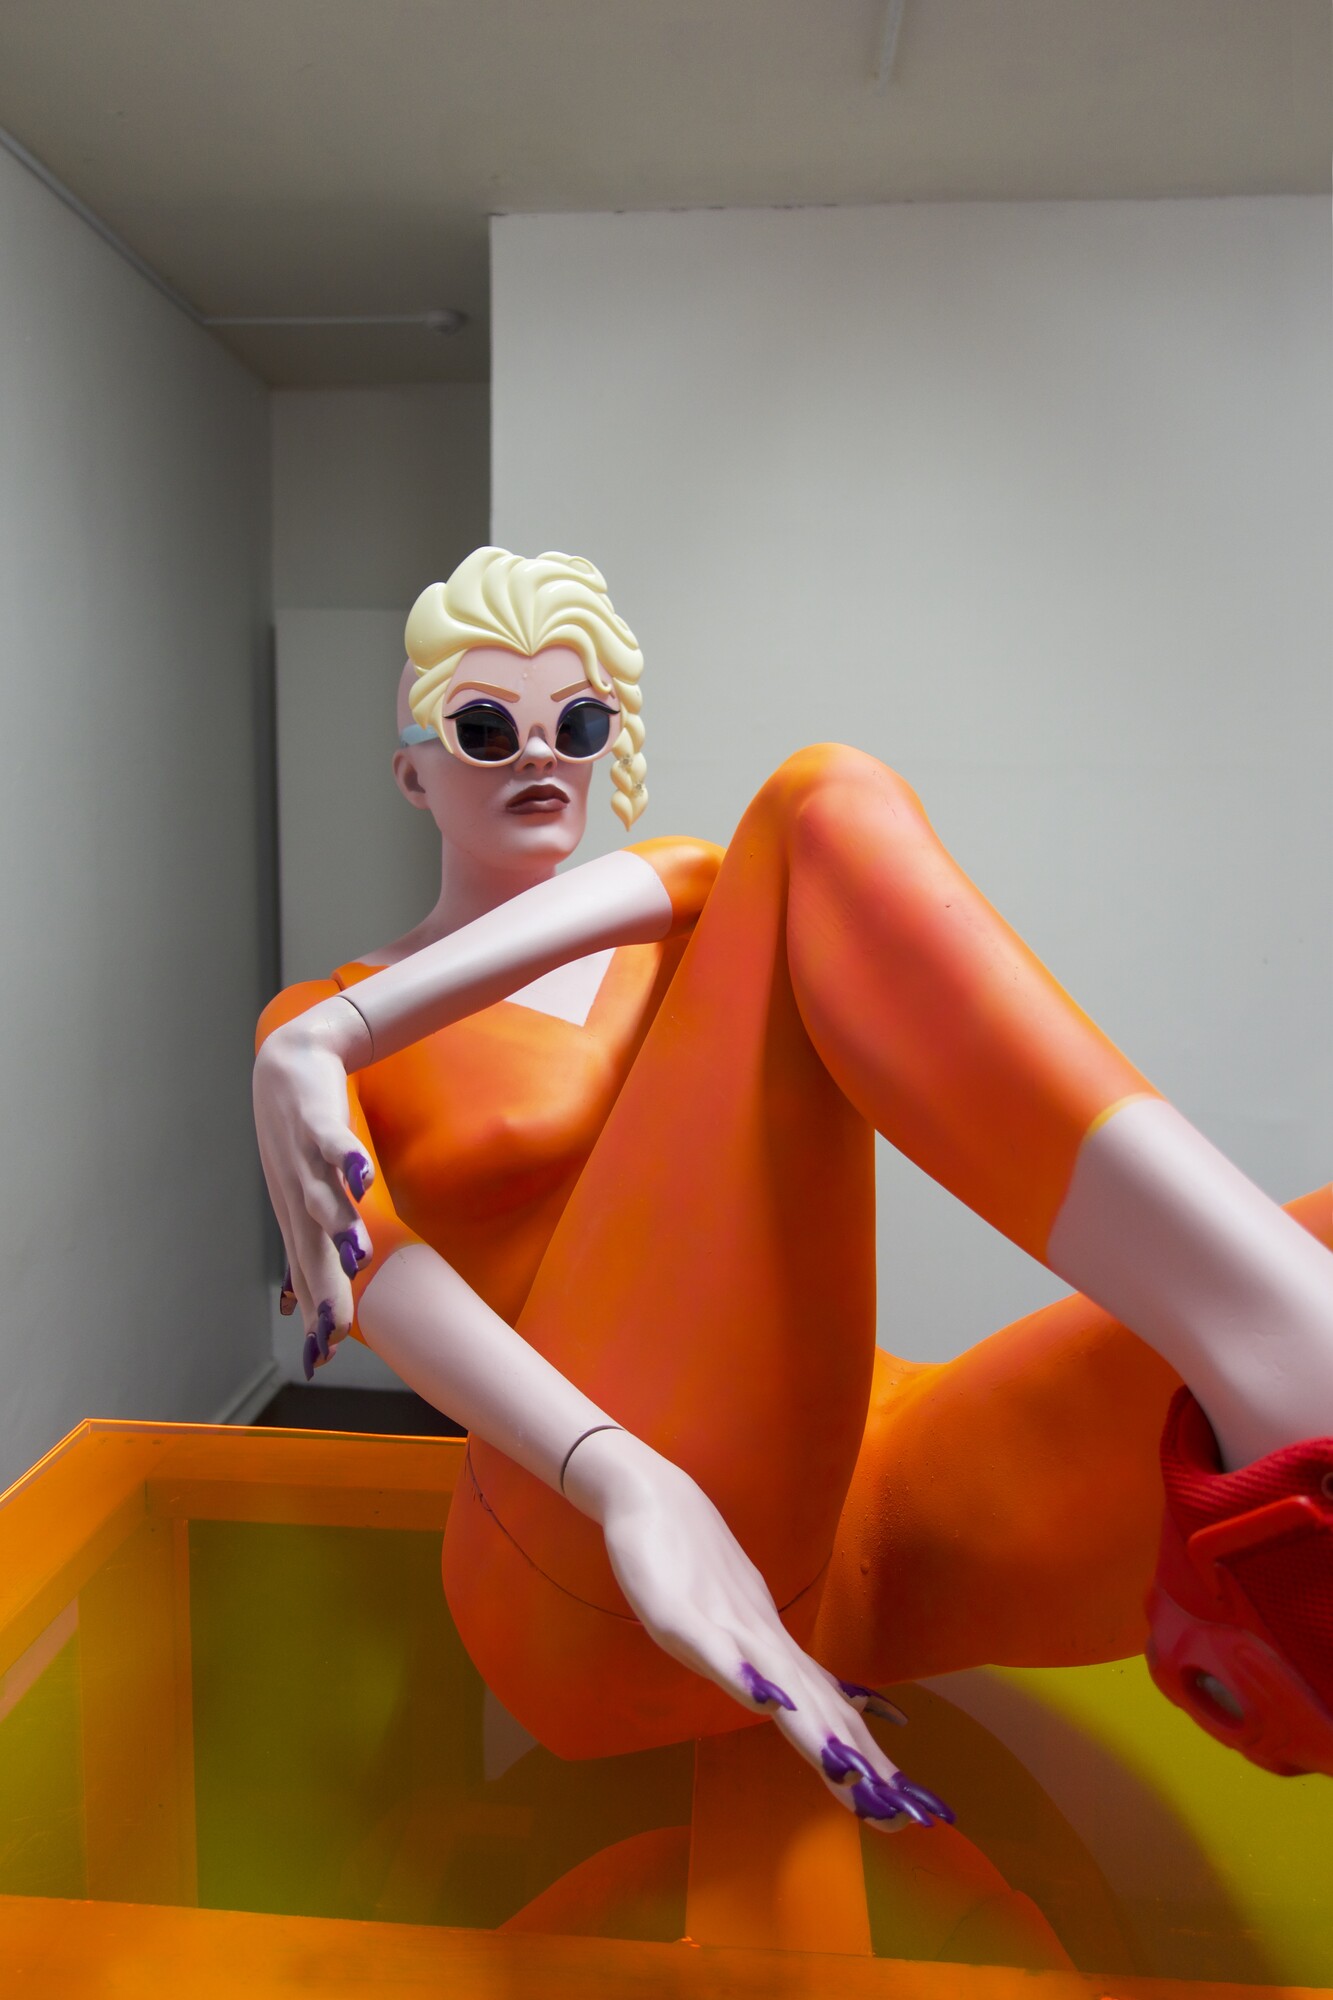 Justene Williams, <em>If I’m going to hell you’re coming with me</em>, 2023, mannequin, sunglasses, sneakers, perspex, dimensions variable, Knulp. Photo: courtesy of Knulp and Alex Gawronski